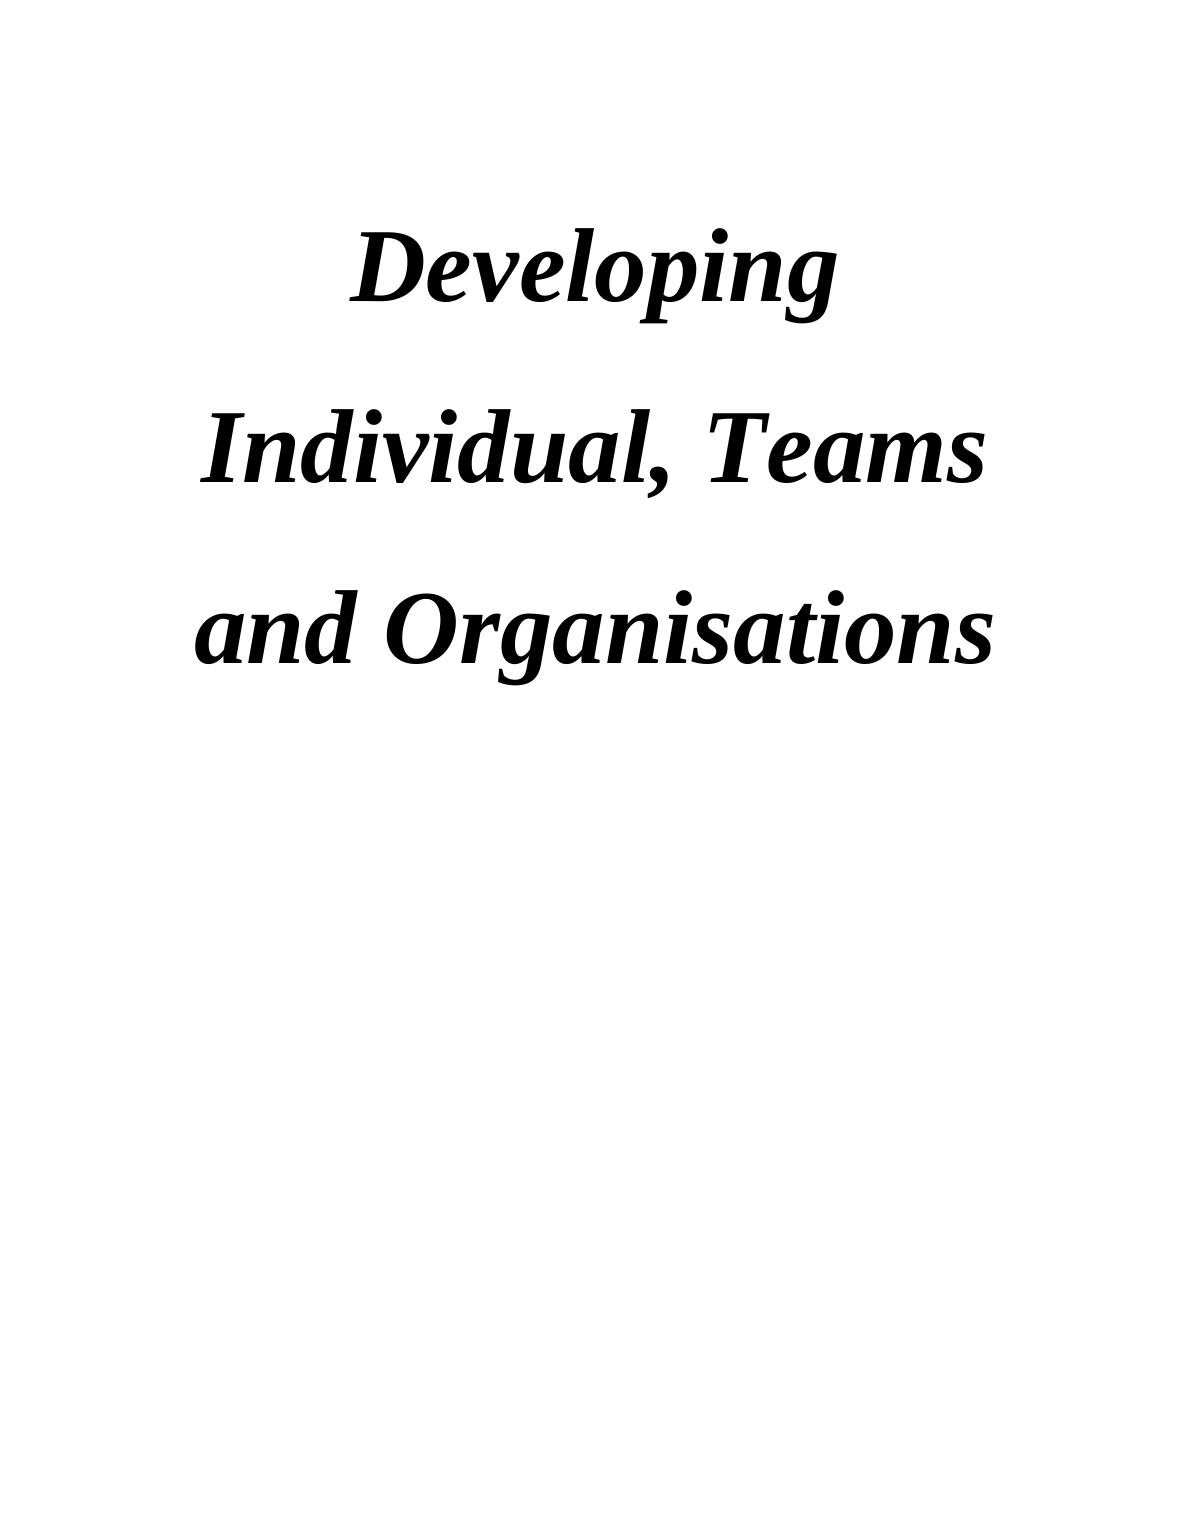 Developing Individuals, Teams And Organization Assignment_1